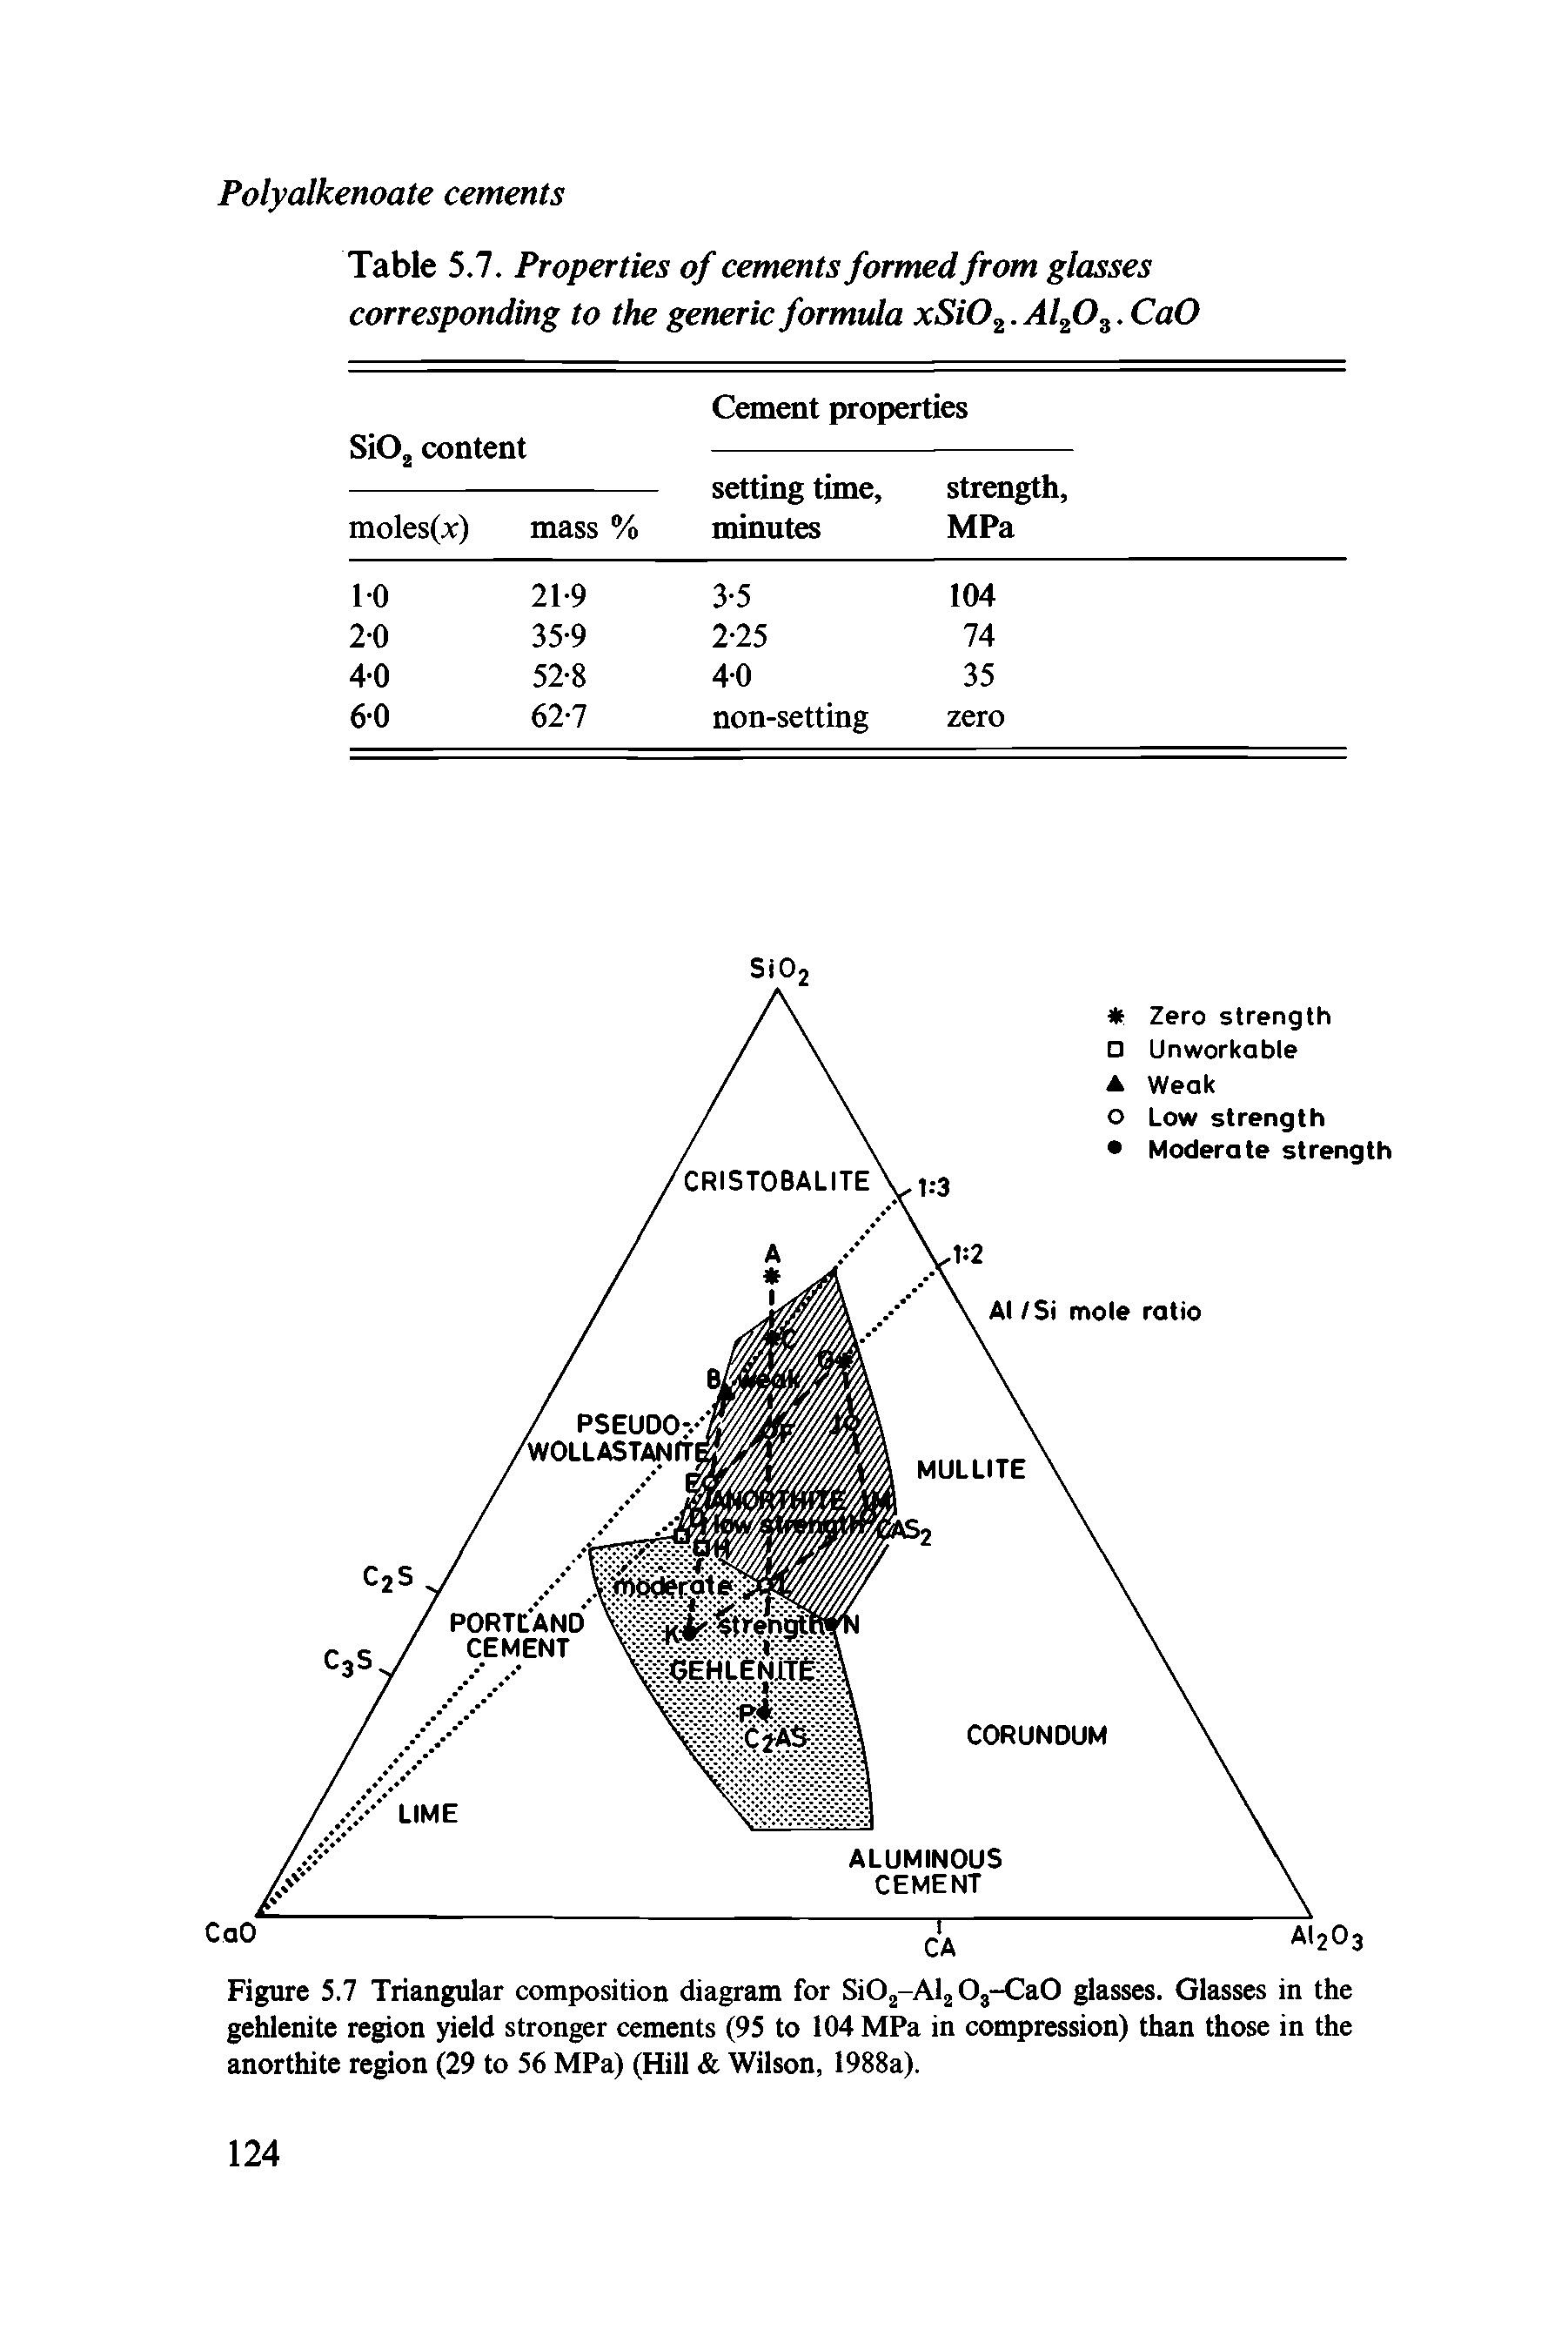 Figure 5.7 Triangular composition diagram for SiOj-Al Oj-CaO glasses. Glasses in the gehlenite region yield stronger cements (95 to 104 MPa in compression) than those in the anorthite region (29 to 56 MPa) (Hill Wilson, 1988a).